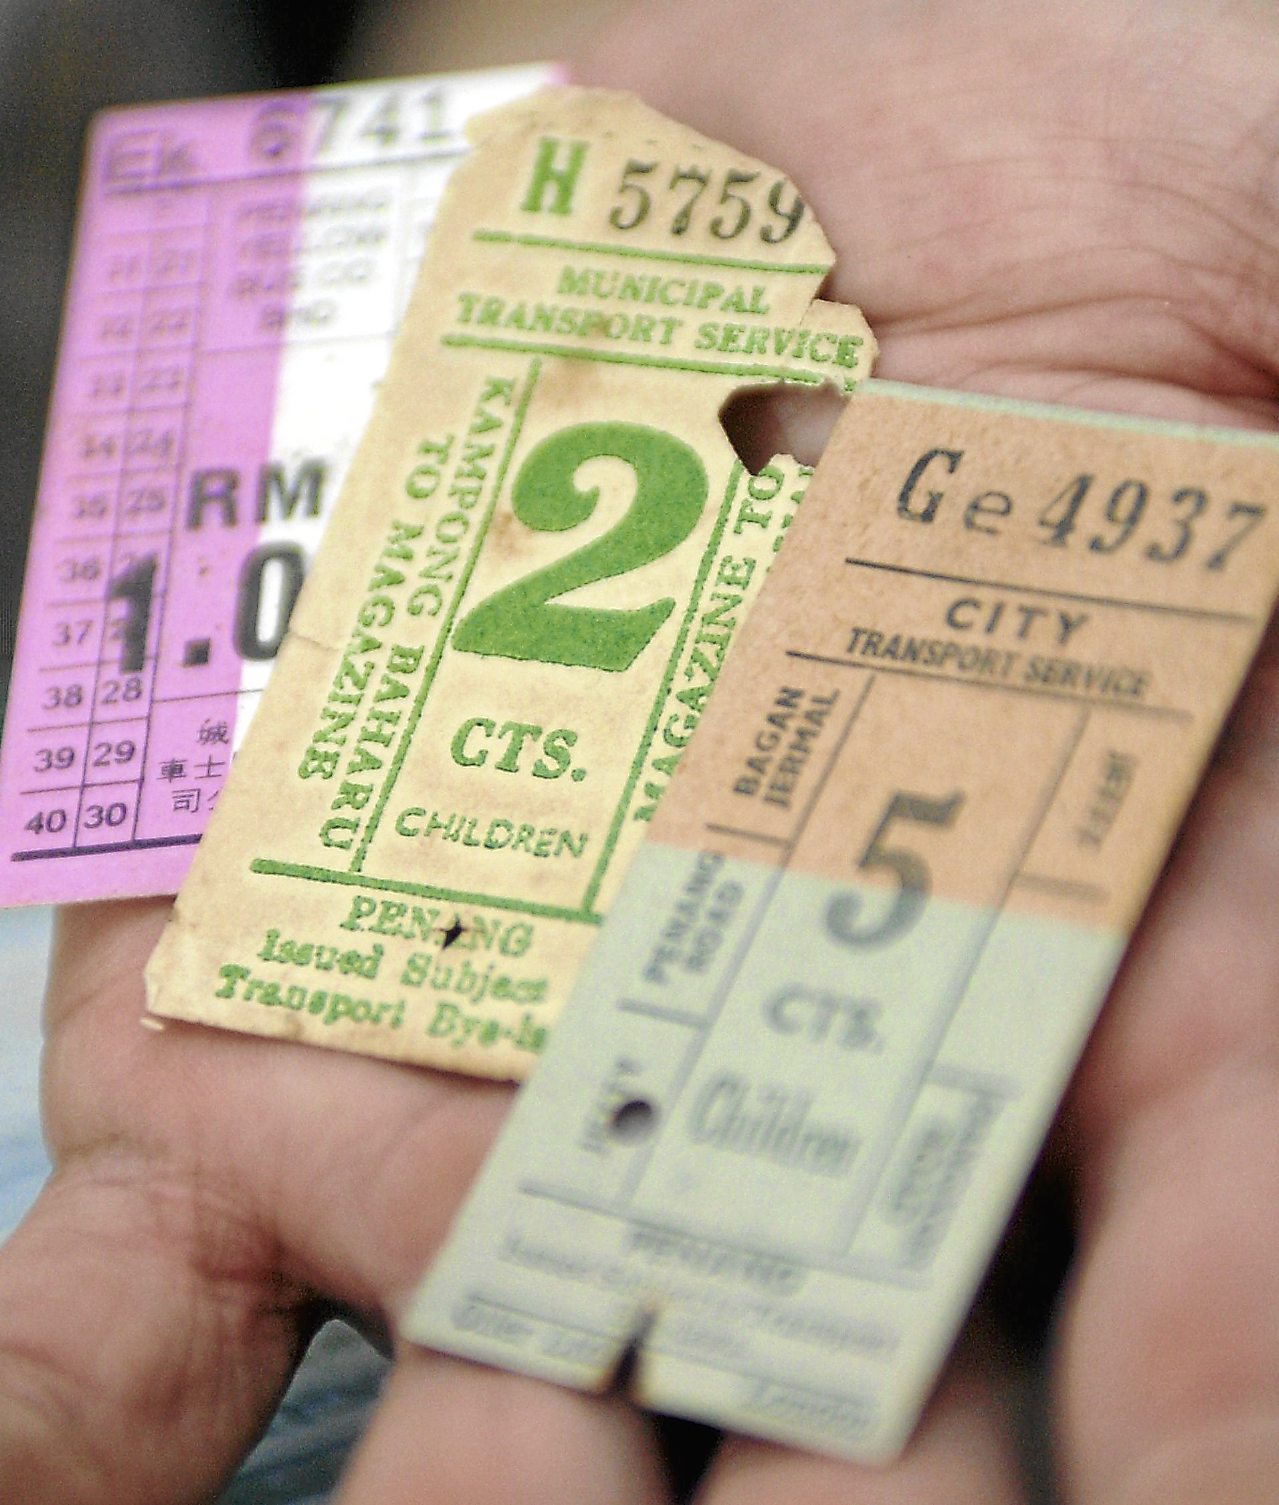 Avid numismatist and collector Danny Tan Swee Boon showing some of the old Penang tramway and Penang City Council bus tickets that he has in his collection.